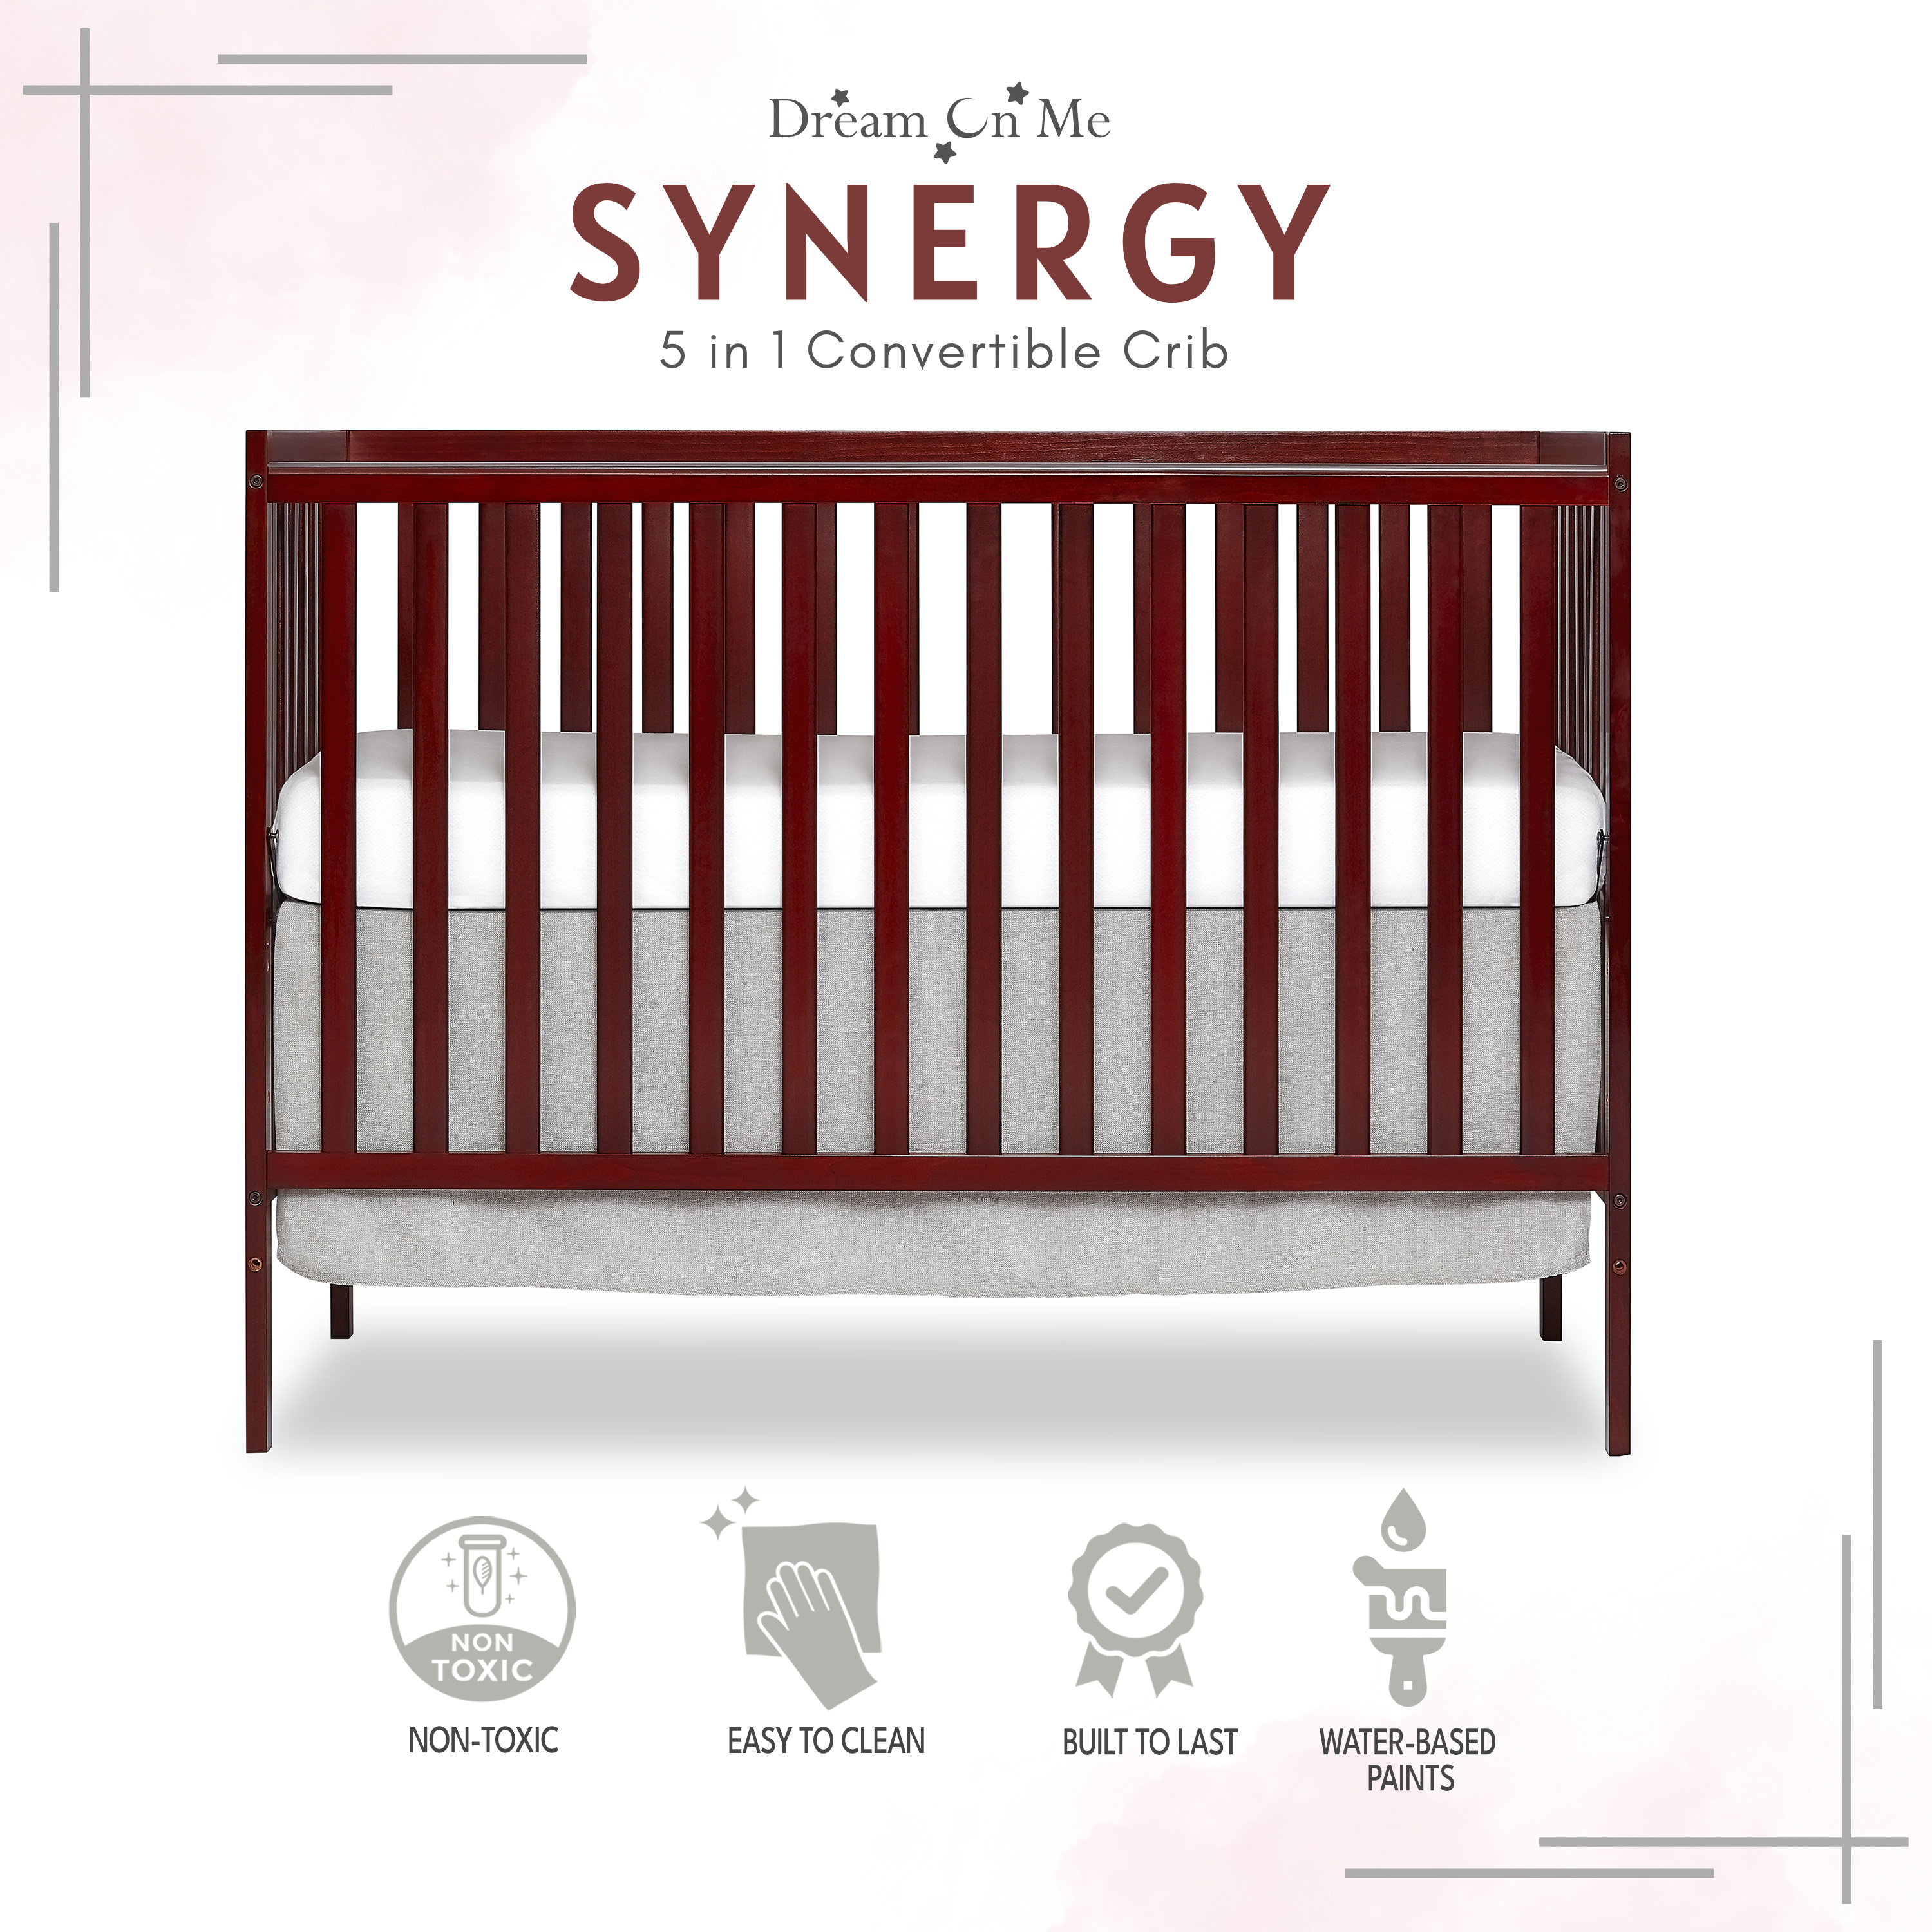 Dream On Me Synergy 5-in-1 Convertible Crib in Cherry, Greenguard Gold Certified - image 2 of 12